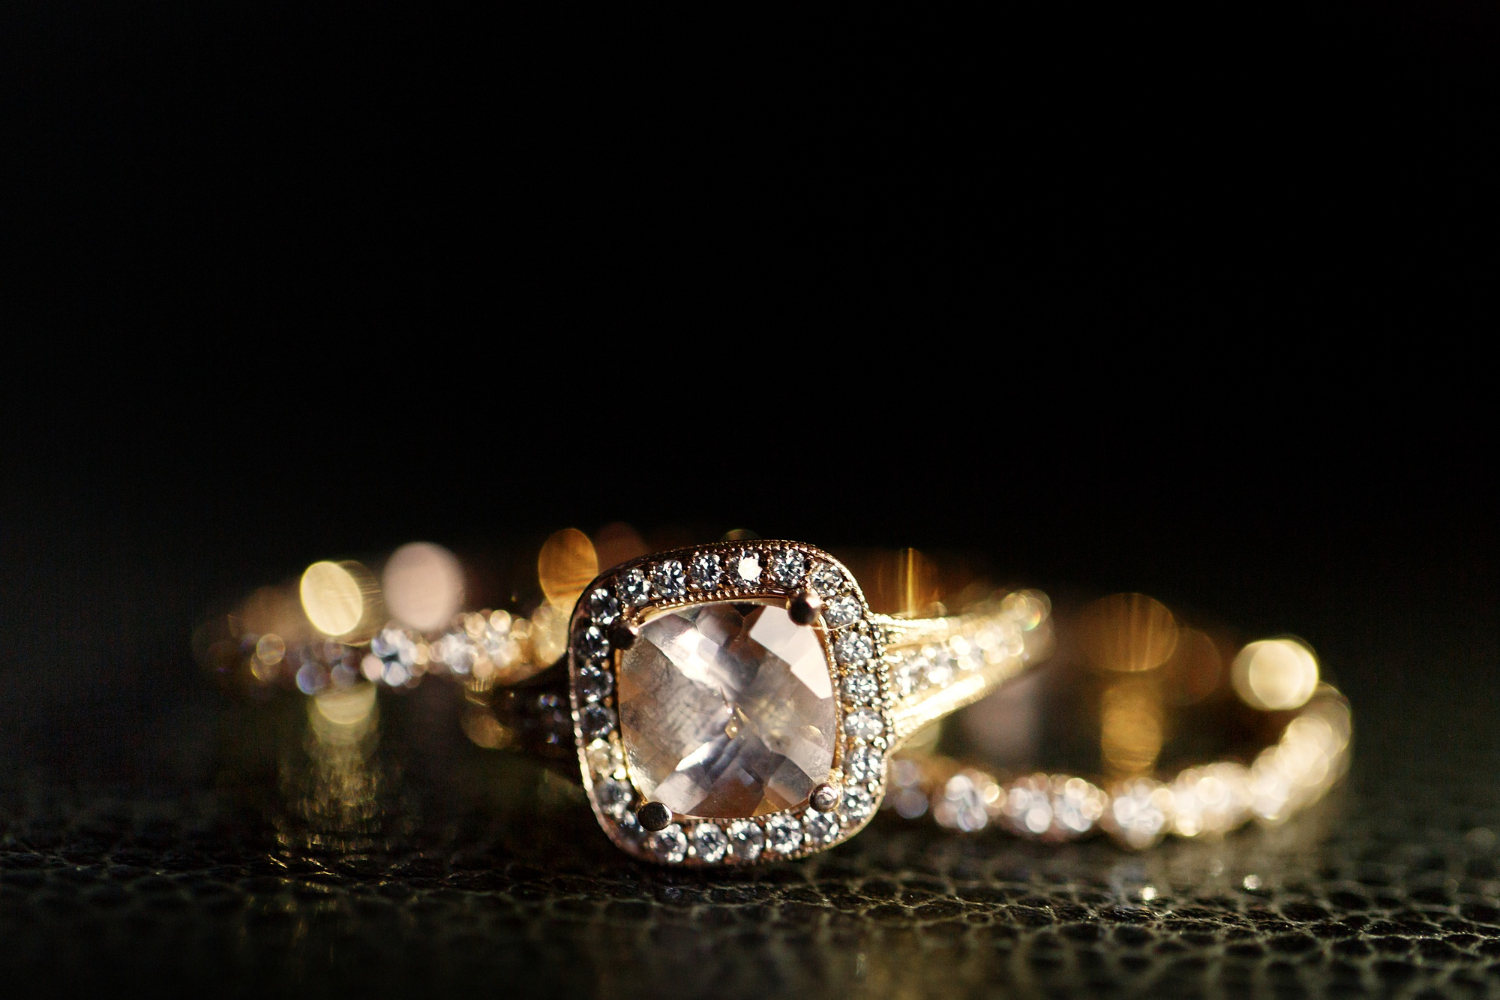 jewels-sparkle-golden-wedding-rings-lying-leather